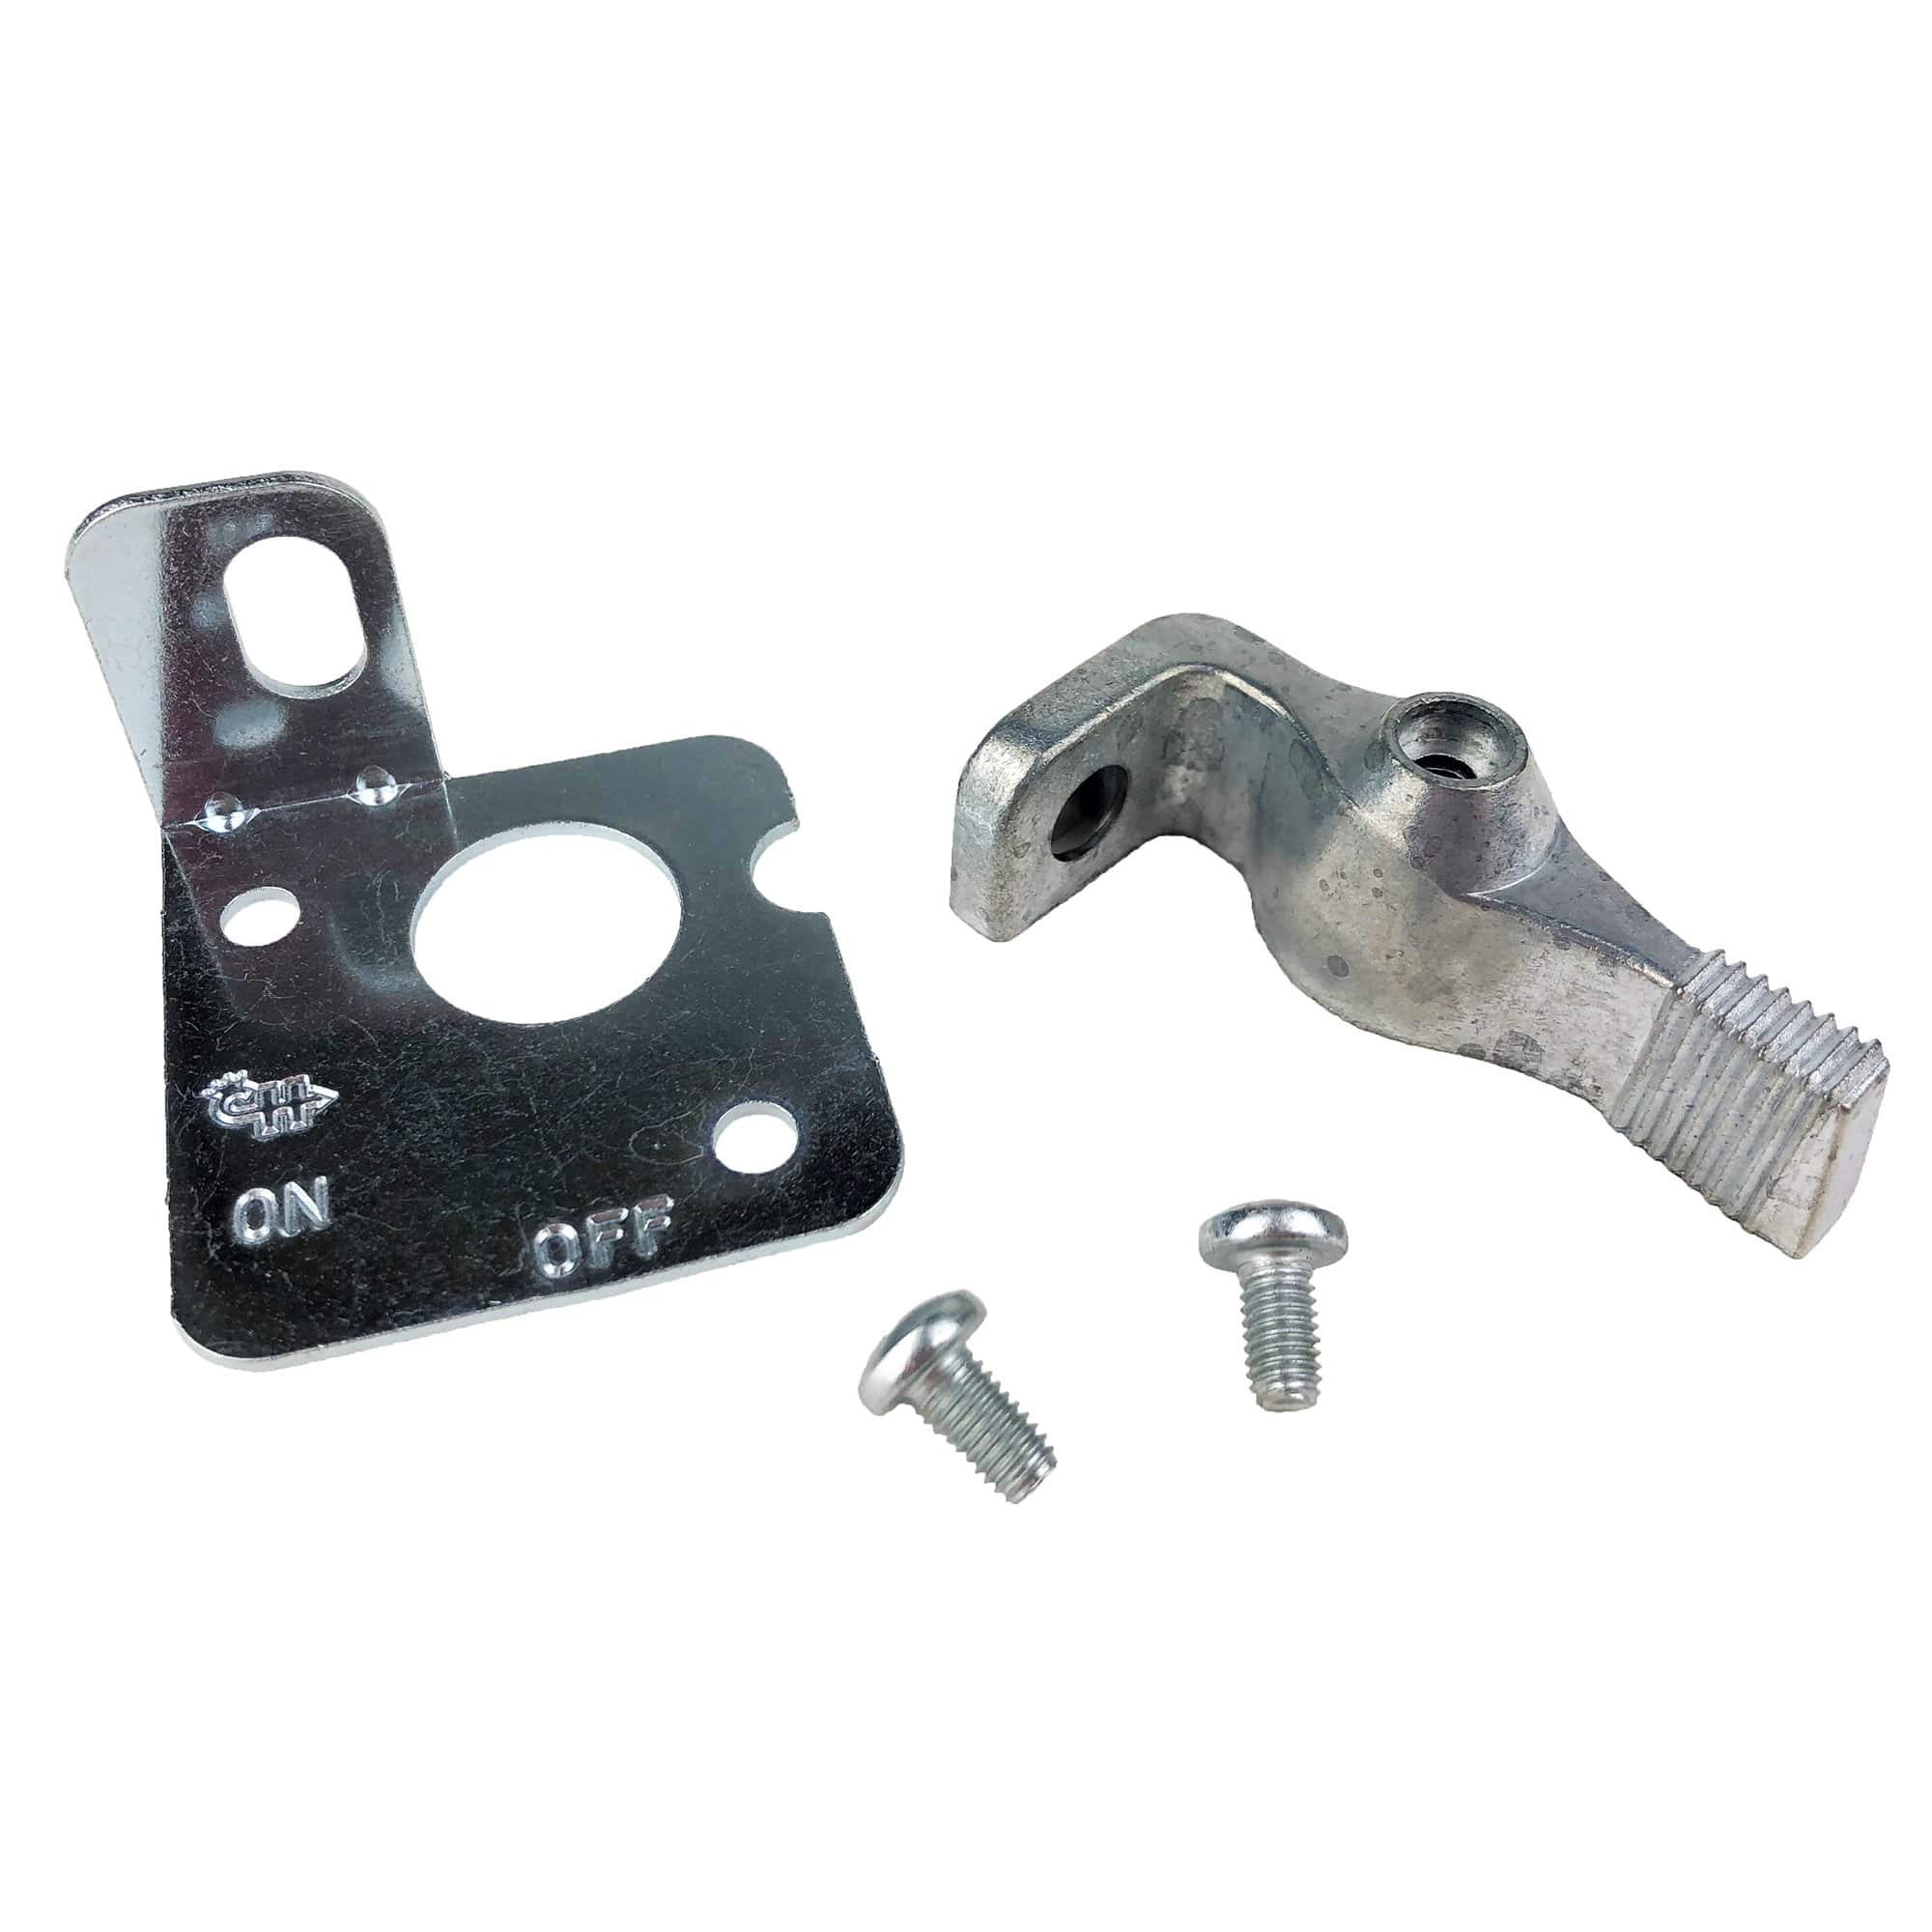 Littelfuse 24505 Lockout Lever Kit for Master Disconnect Switches